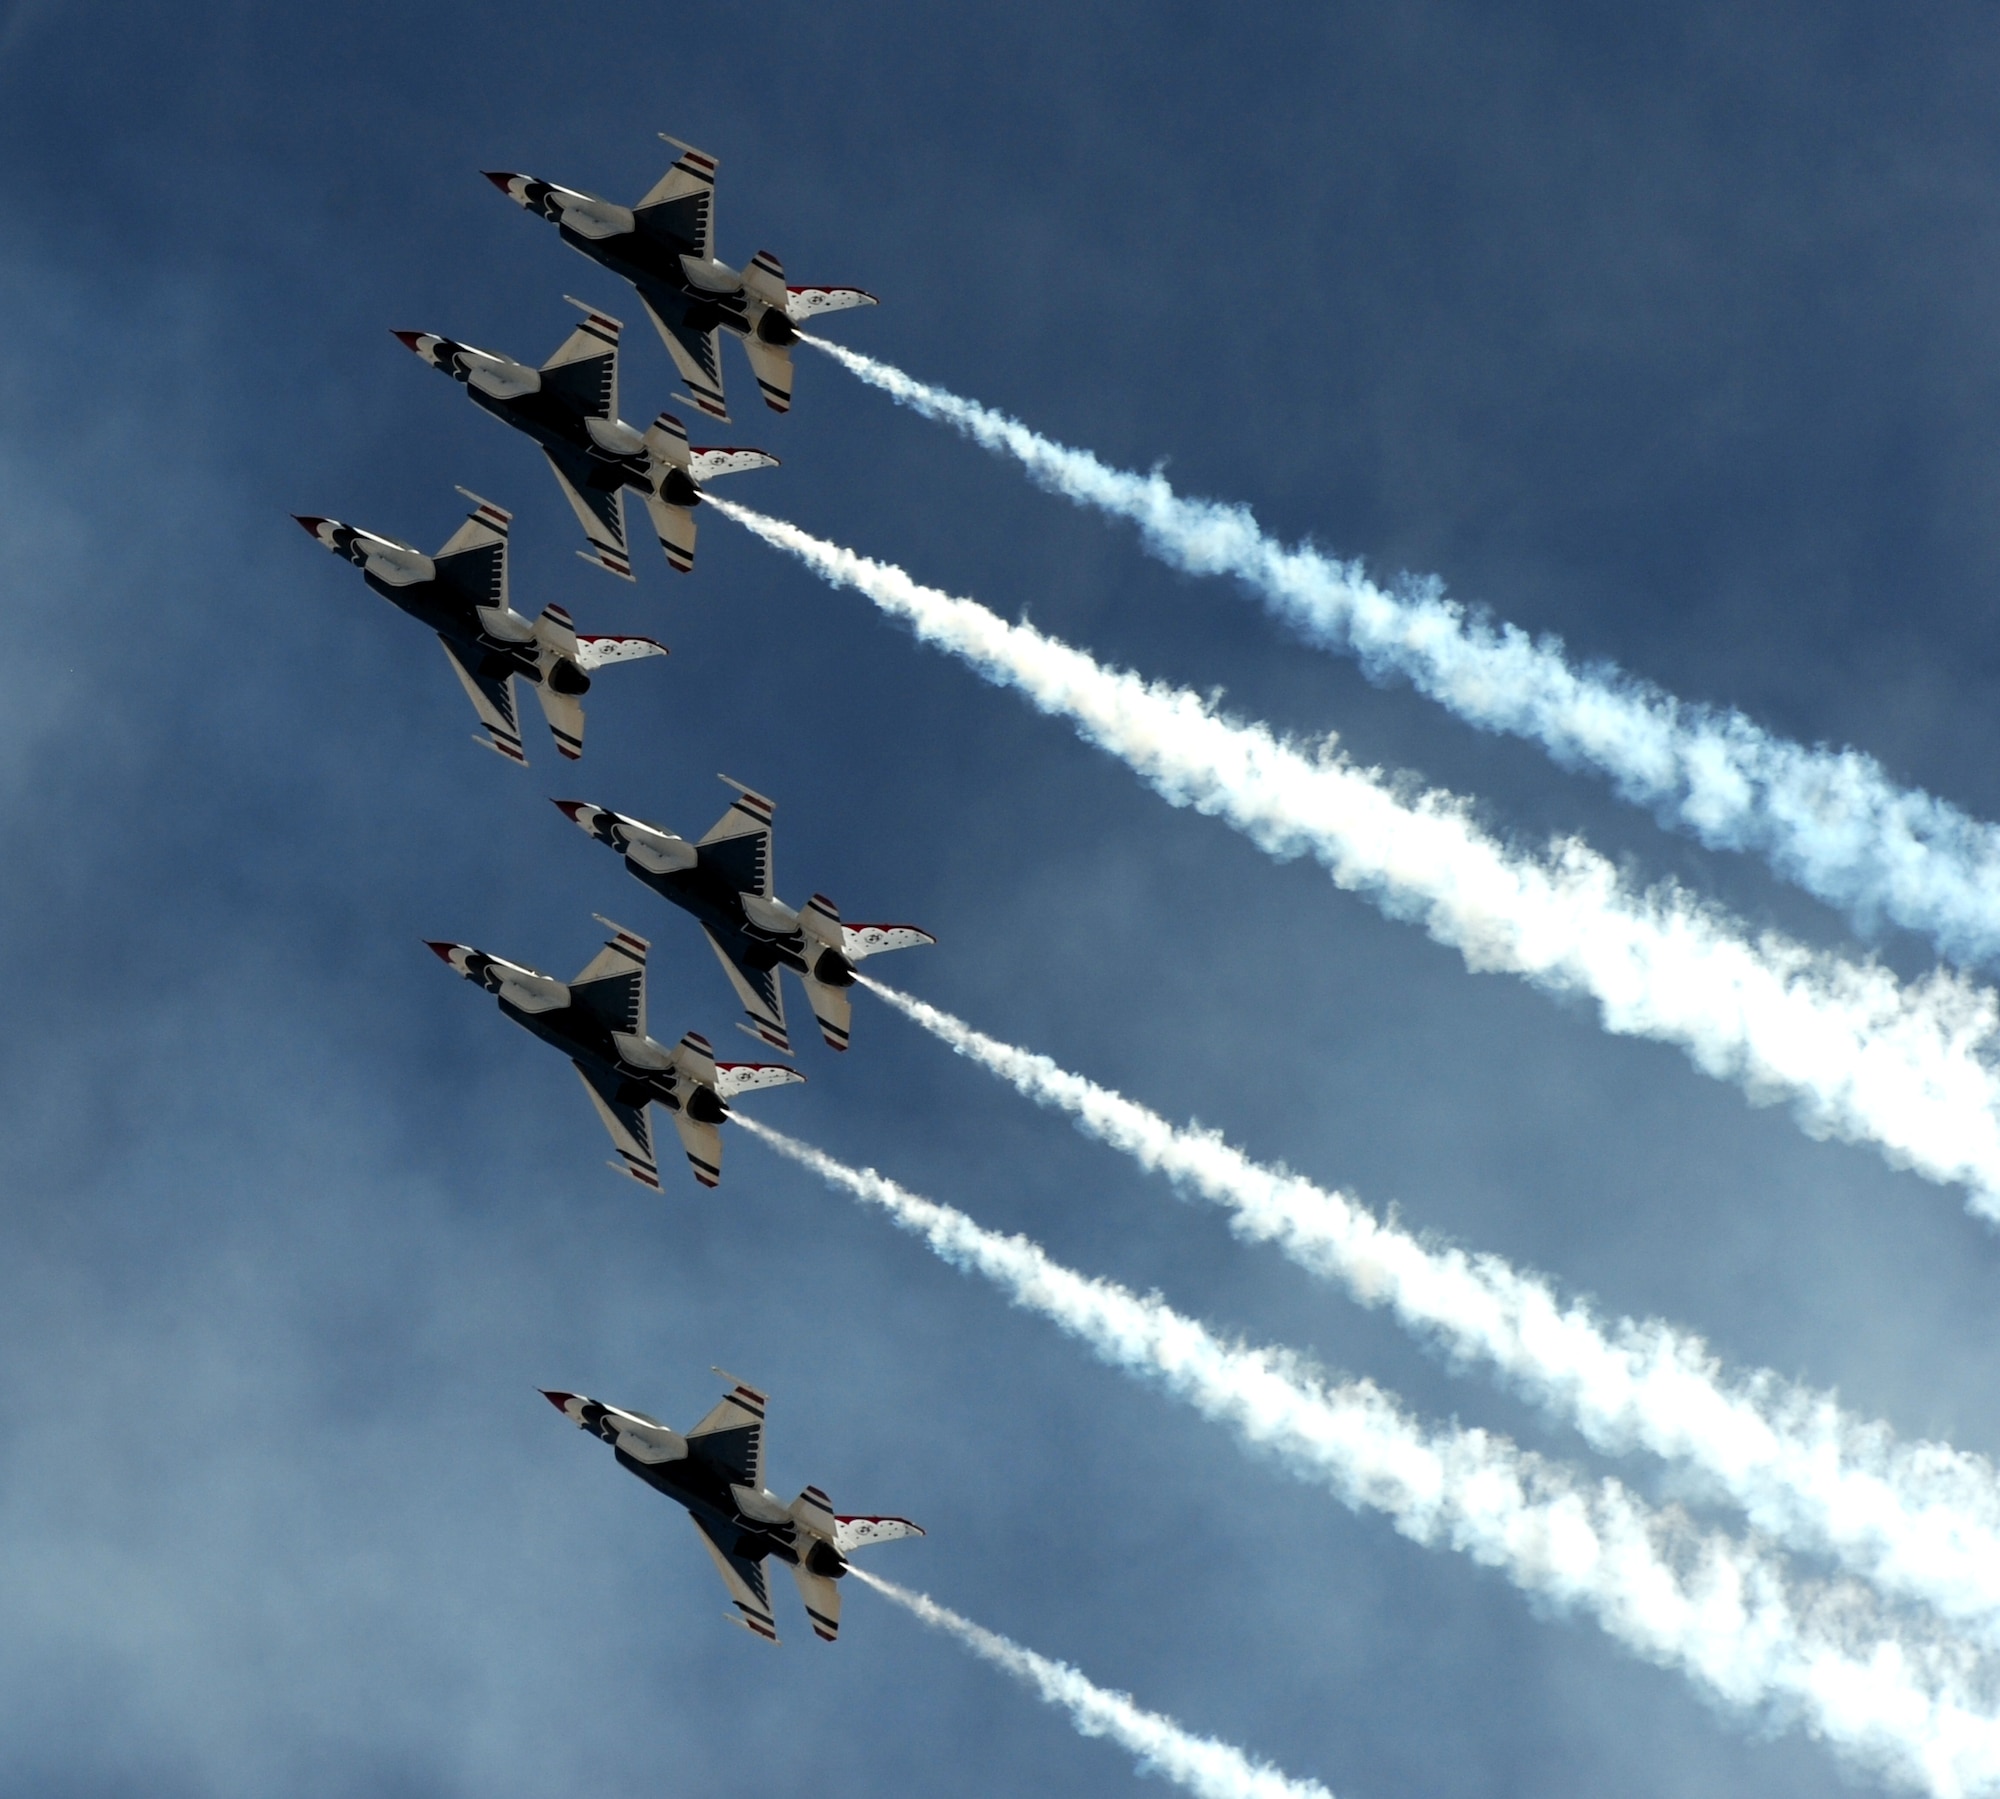 The U.S. Air Force Thunderbirds demonstration team climbs skyward during the Capital City Air Show at Mather Airport, Sacramento, Calif., Sept. 8, 2012. The Thunderbirds often fly just a few feet from wingtip to wingtip during their routines. (U.S. Air Force photo by Staff Sgt. Robert M. Trujillo)